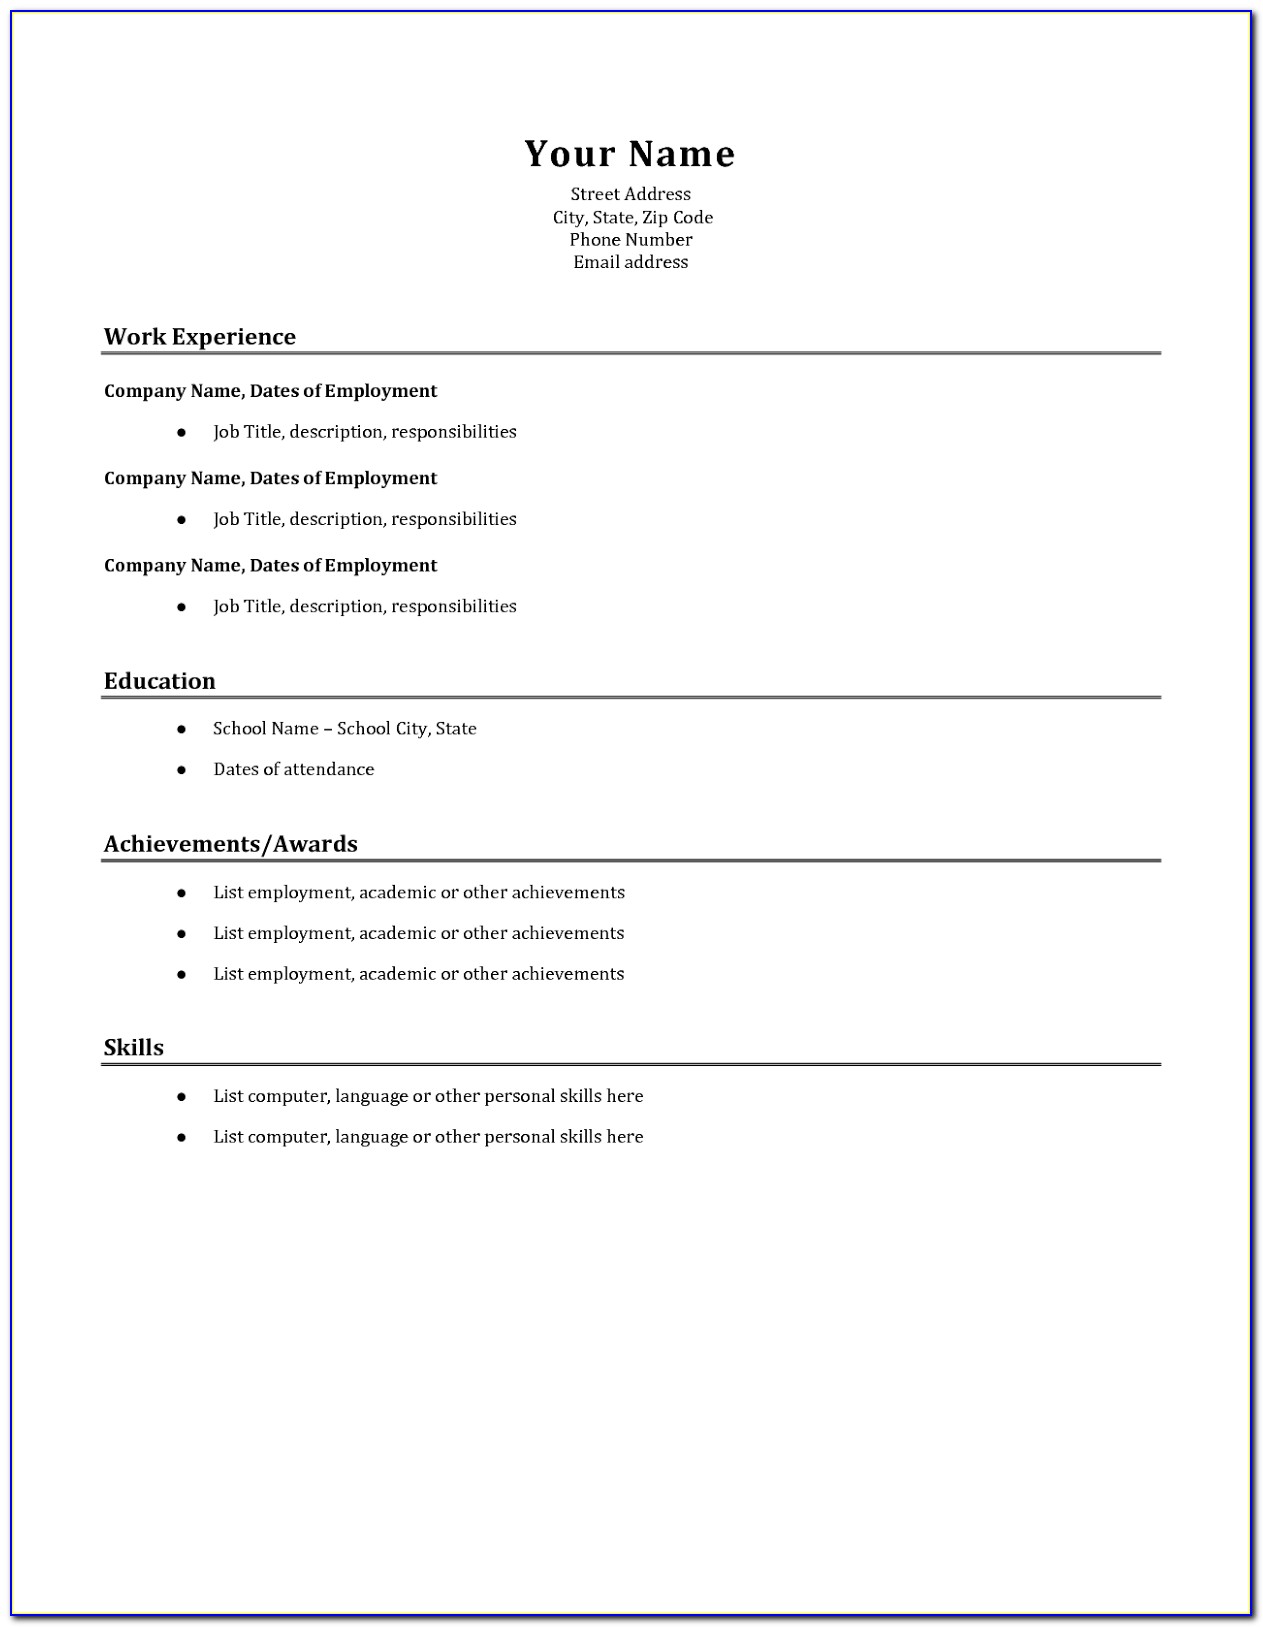 Examples Of Basic Resumes For Jobs